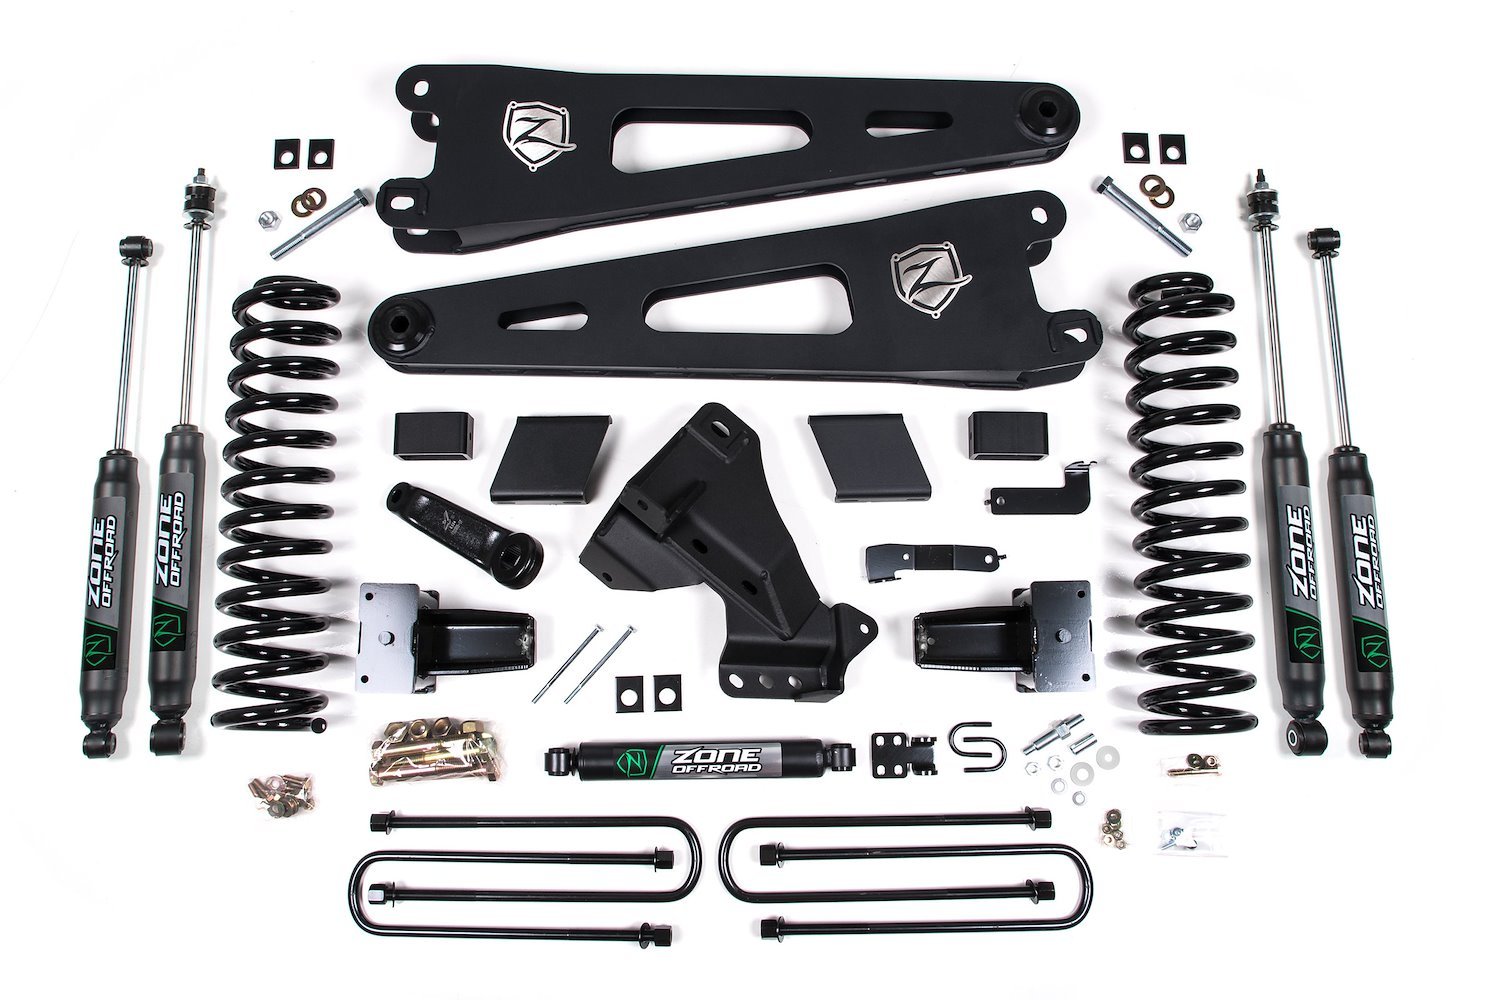 ZONF60N Zone 4" Radius Arm Lift Kit for 2020-2022 Ford F-250/F-350